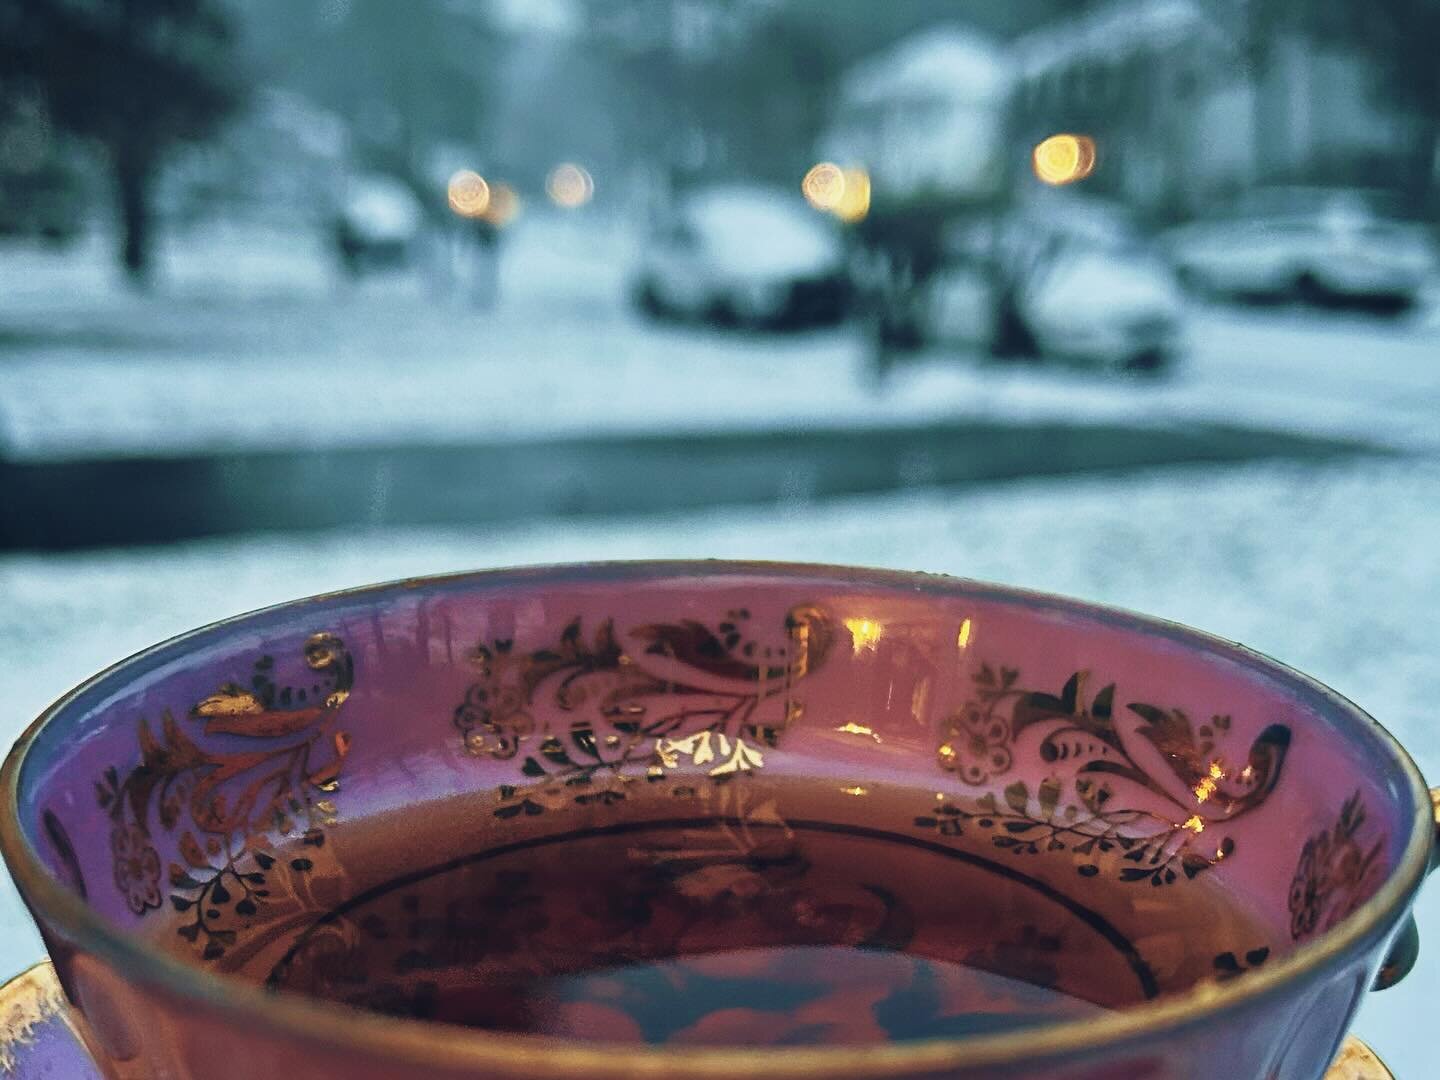 I have been craving a winter wonderland for some time now. With this Rockwell-esque scenery abound, I have been cozied up with a front row seat to the snowfall and been enjoying our NEWEST rotating tea: Golden Temple Yunnan. ☕️

Those of you in the l